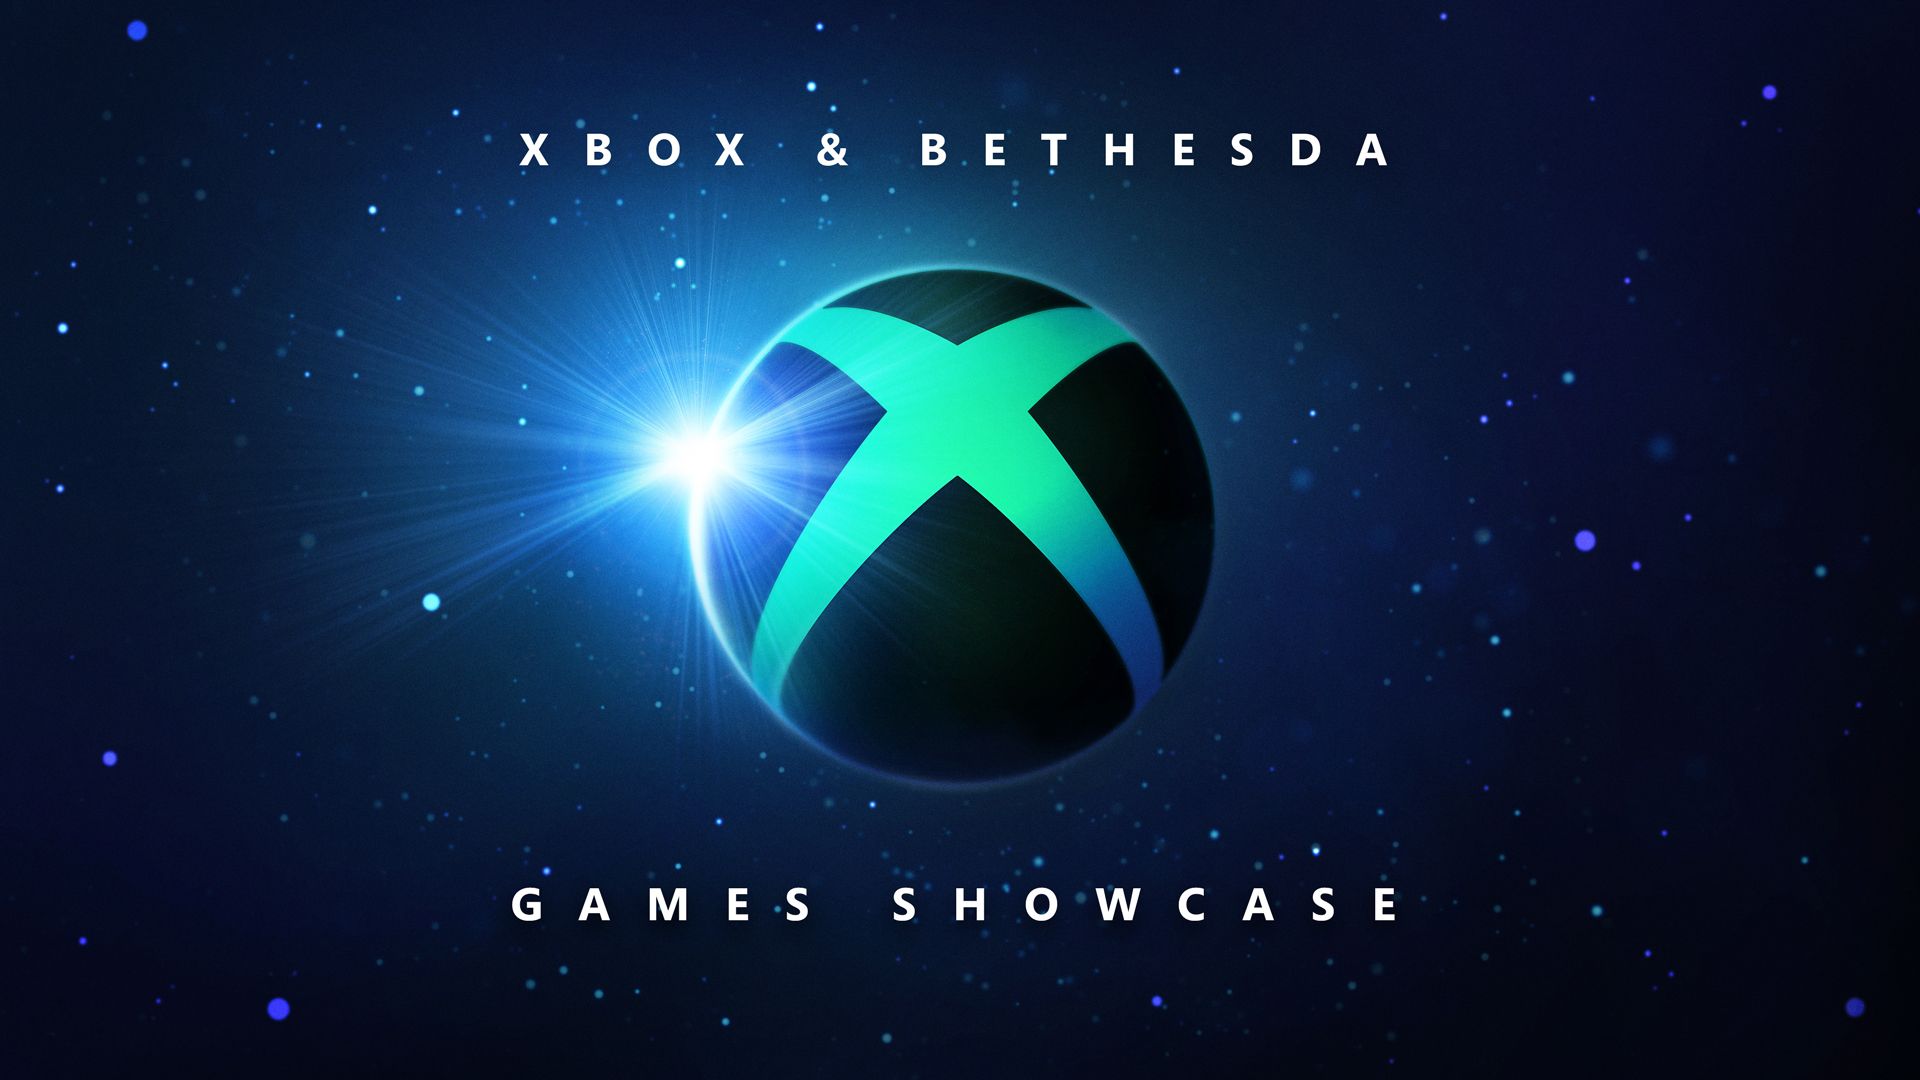 What to Expect from the Xbox Event on June 12?